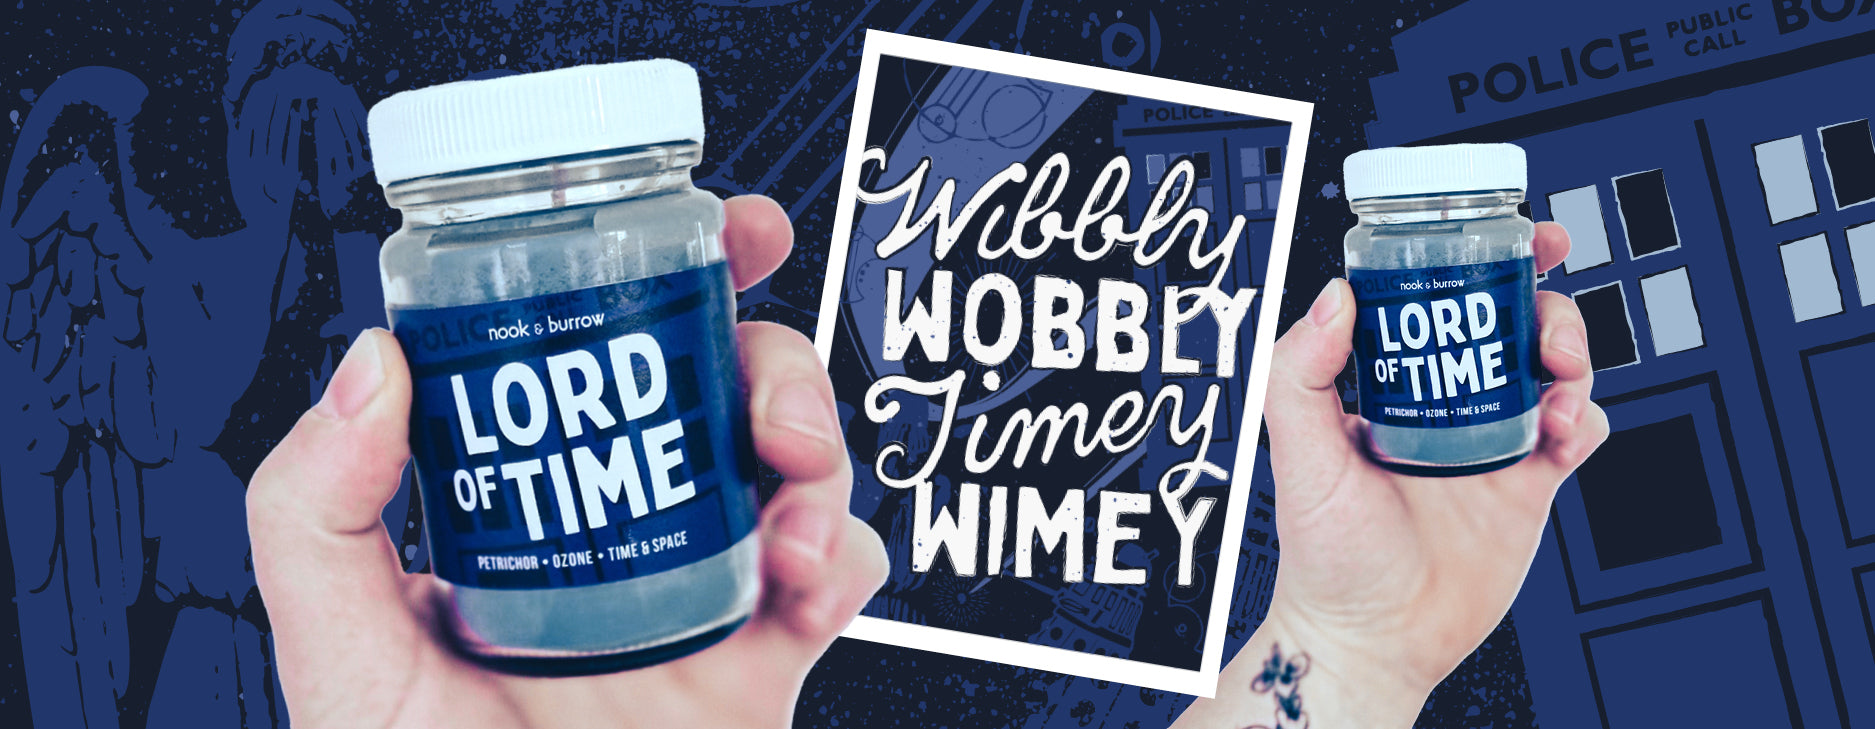 Dr Who candle 'Lord of Time' held up by a hand on the left side and right sides of the banner. With a print in the middle that says 'Wobbly Wobbly Times Wimey'. the overall colour scheme is Police Box Blue and has a Dalek on it.